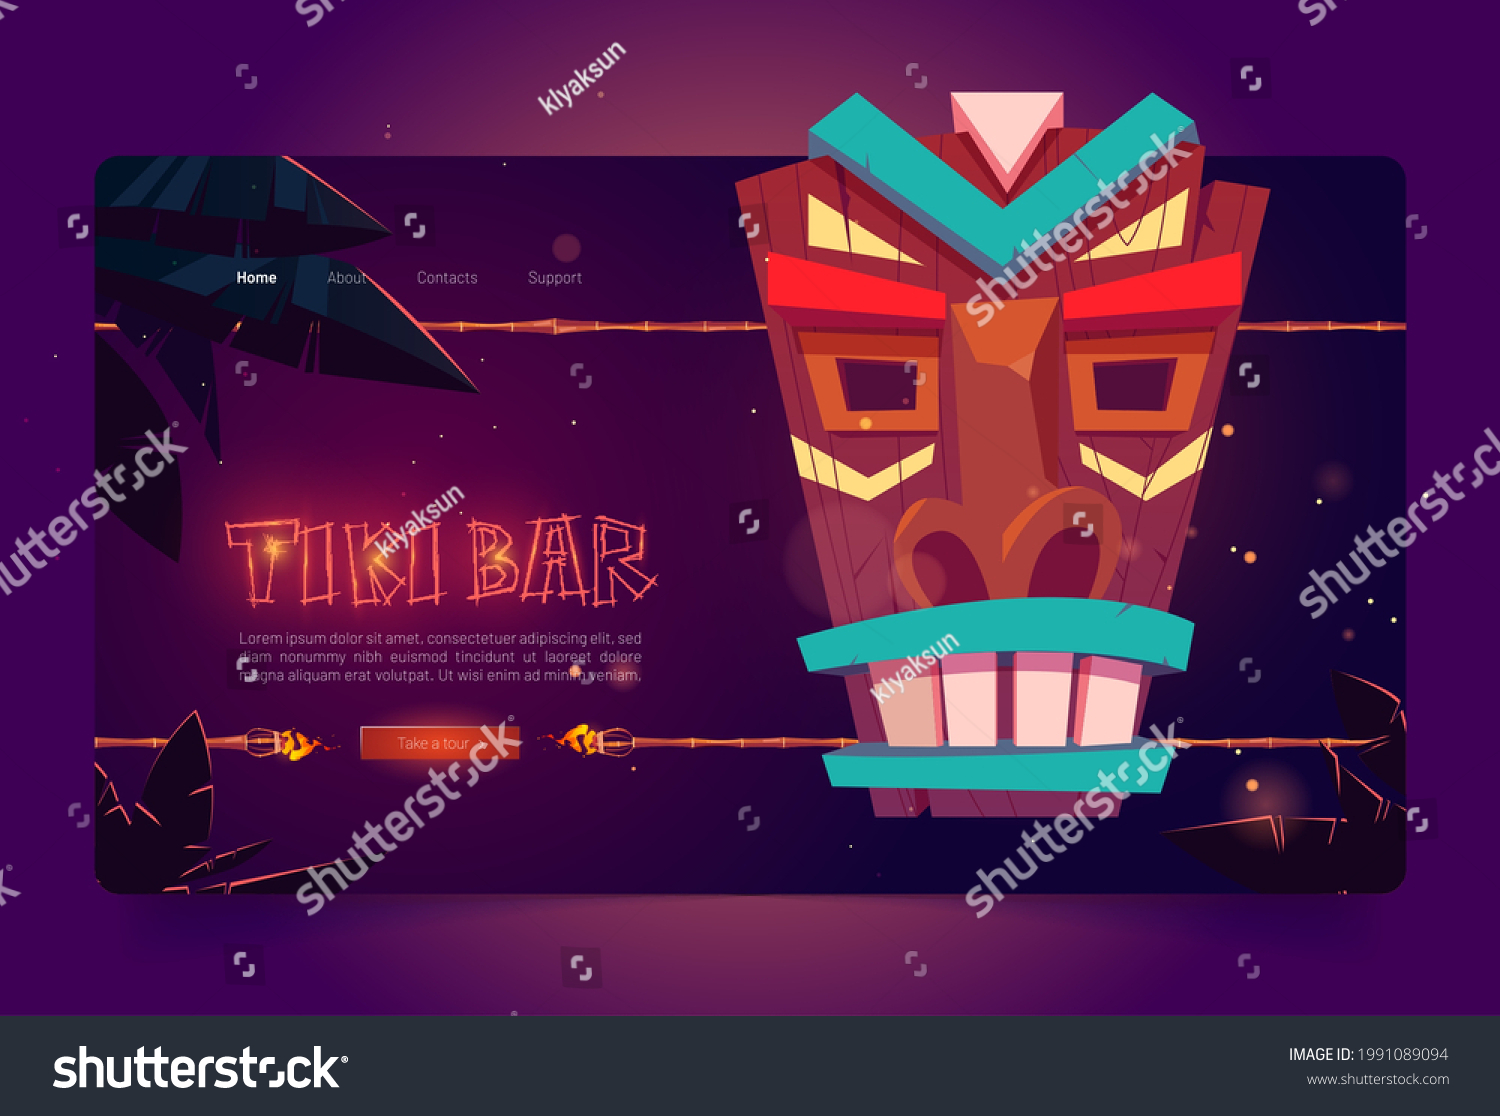 SVG of Tiki bar website with wooden tribal mask and burning torches on bamboo stick. Vector landing page of hawaiian beach cafe with cartoon illustration of polynesian totem and palm trees at night svg